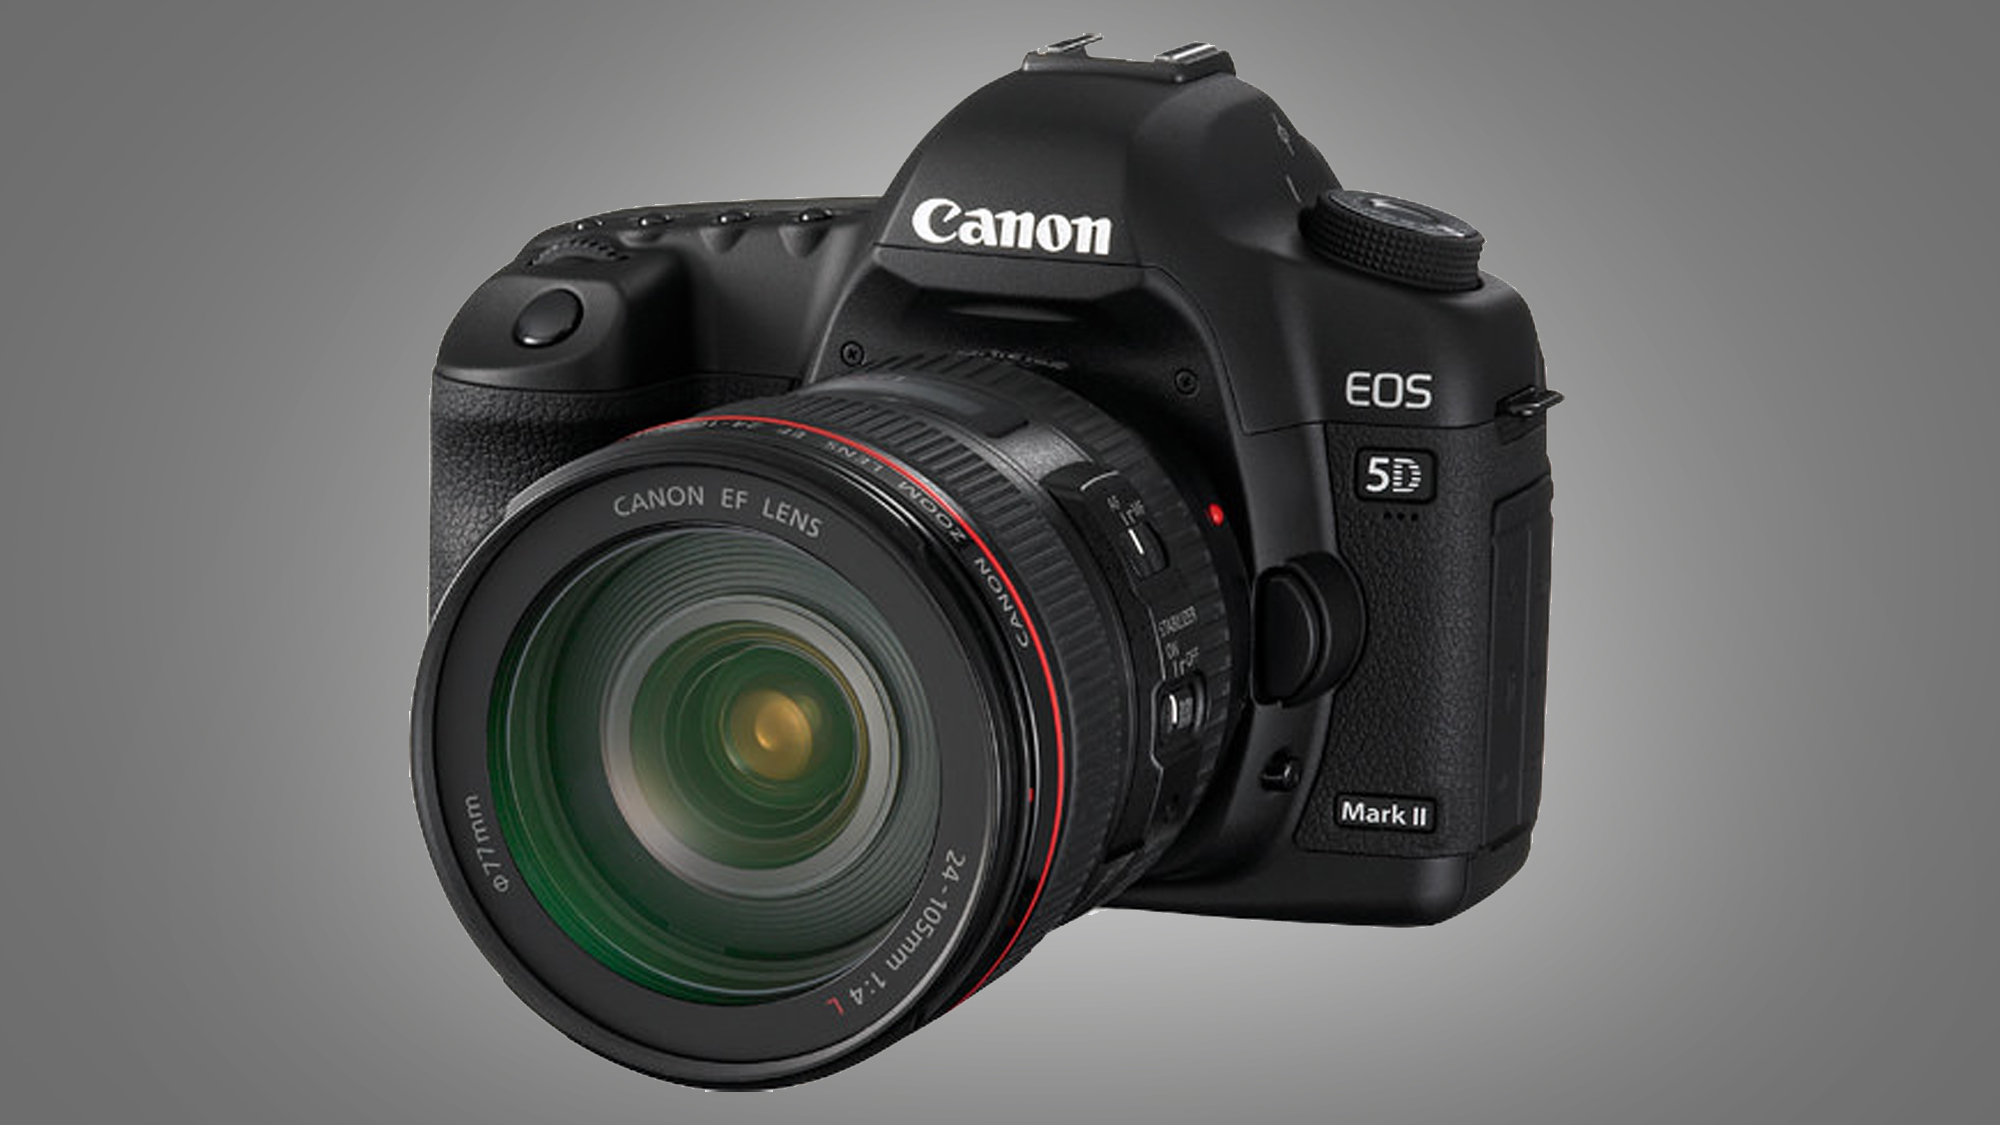 The Canon EOS 5D Mark II on a grey background